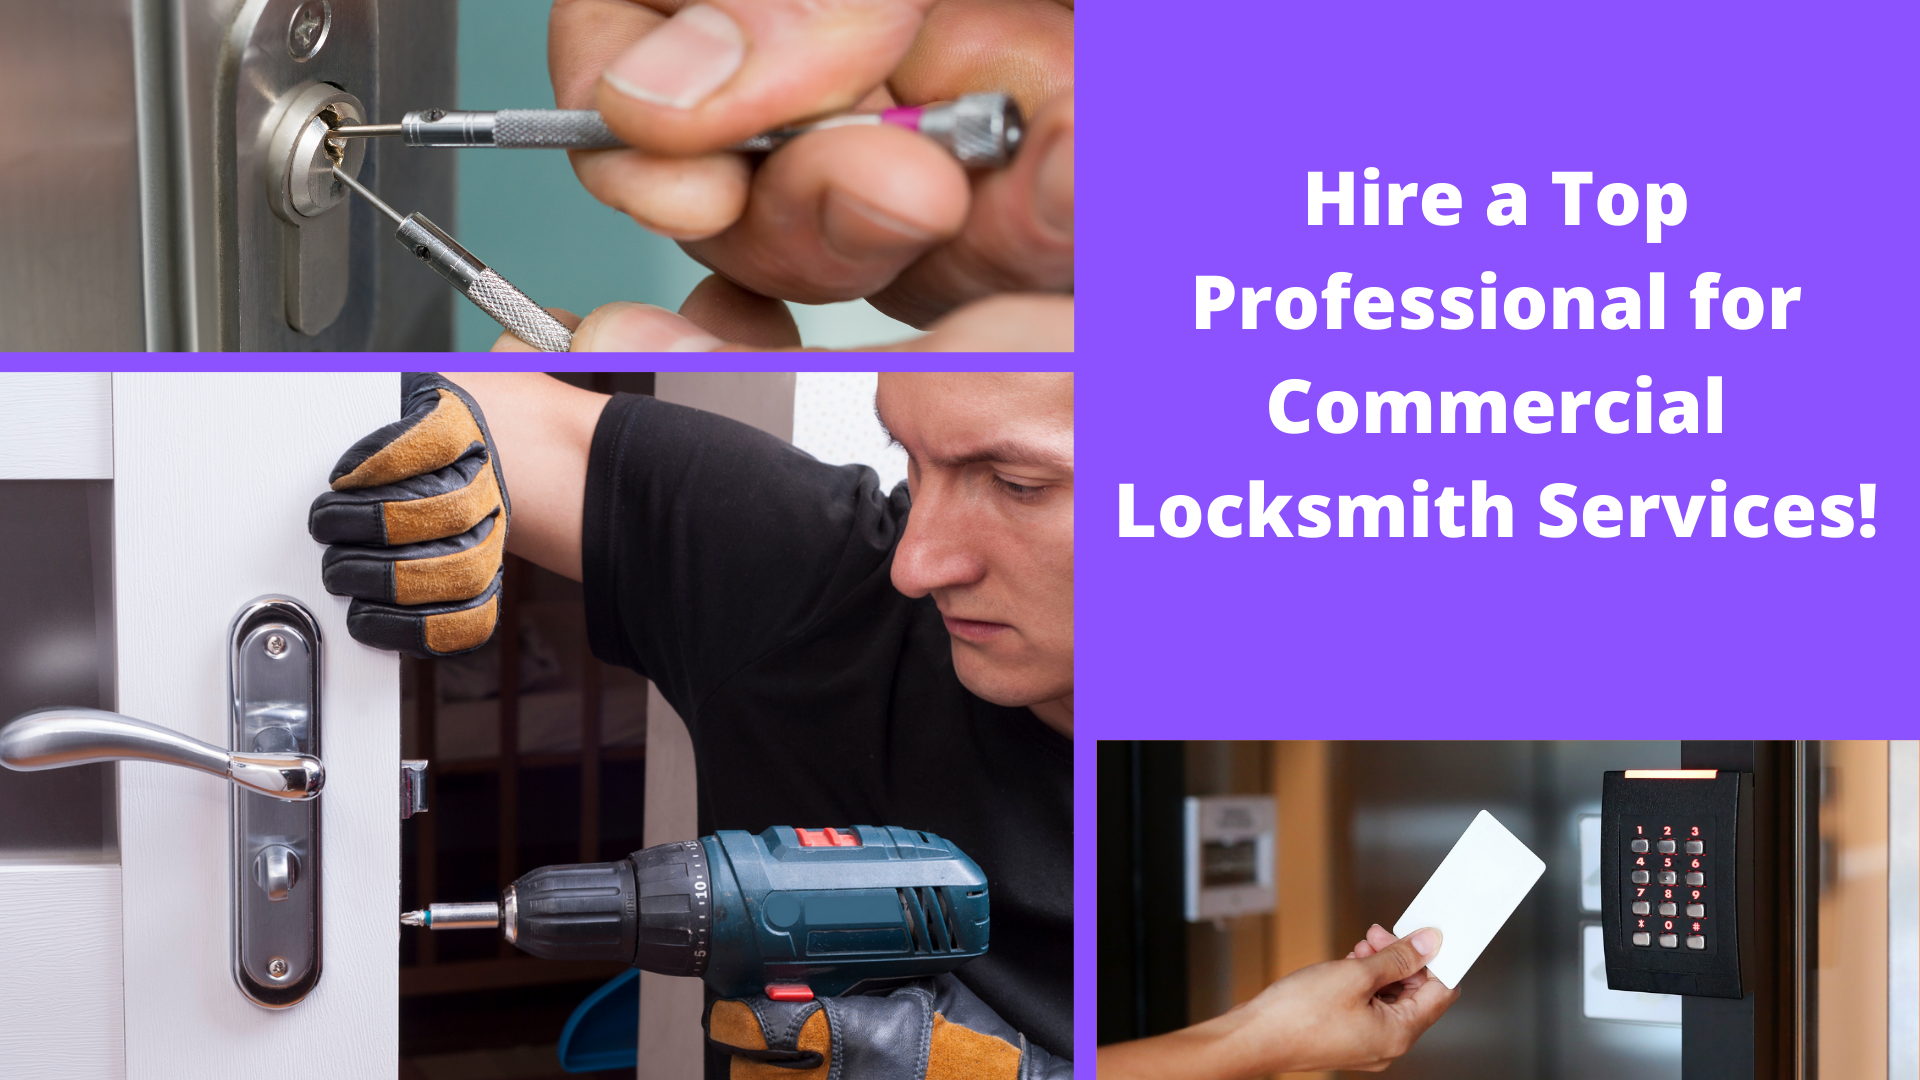 Hire a Top Professional for Commercial Locksmith Services! - 24/7 Locksmith L.A.